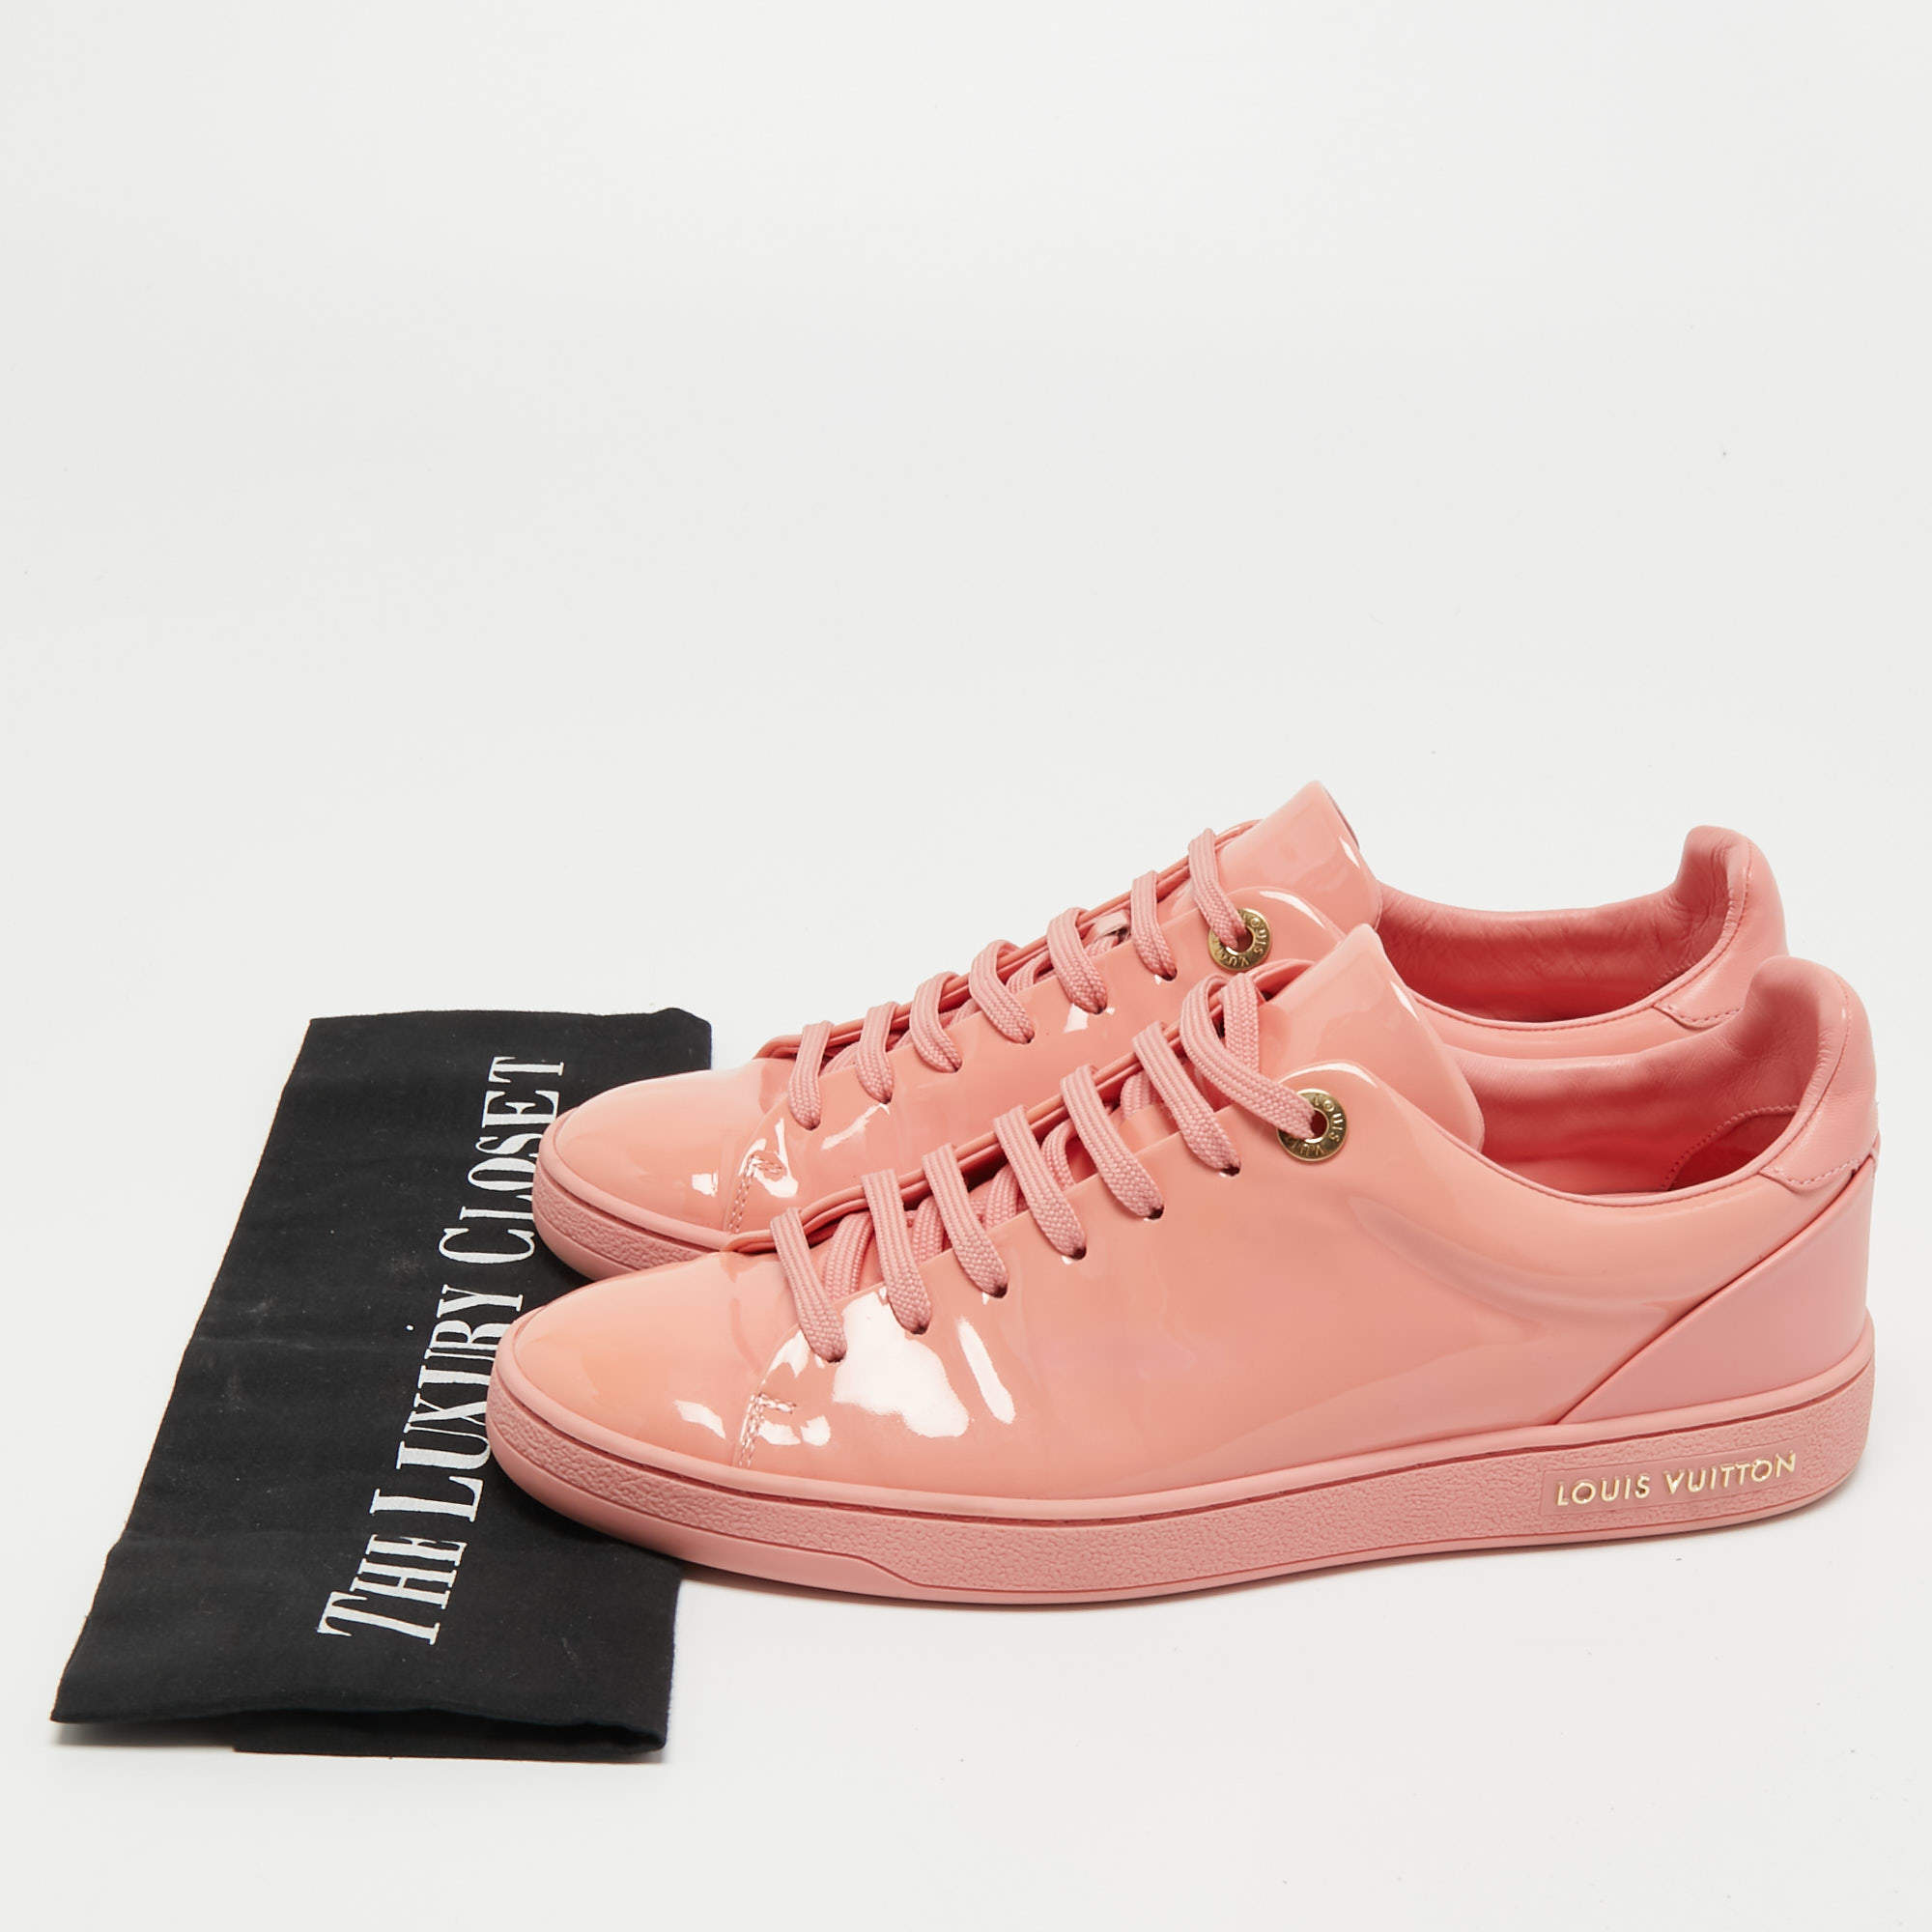 Louis Vuitton Pink Patent Leather Frontrow Sneakers Size 37